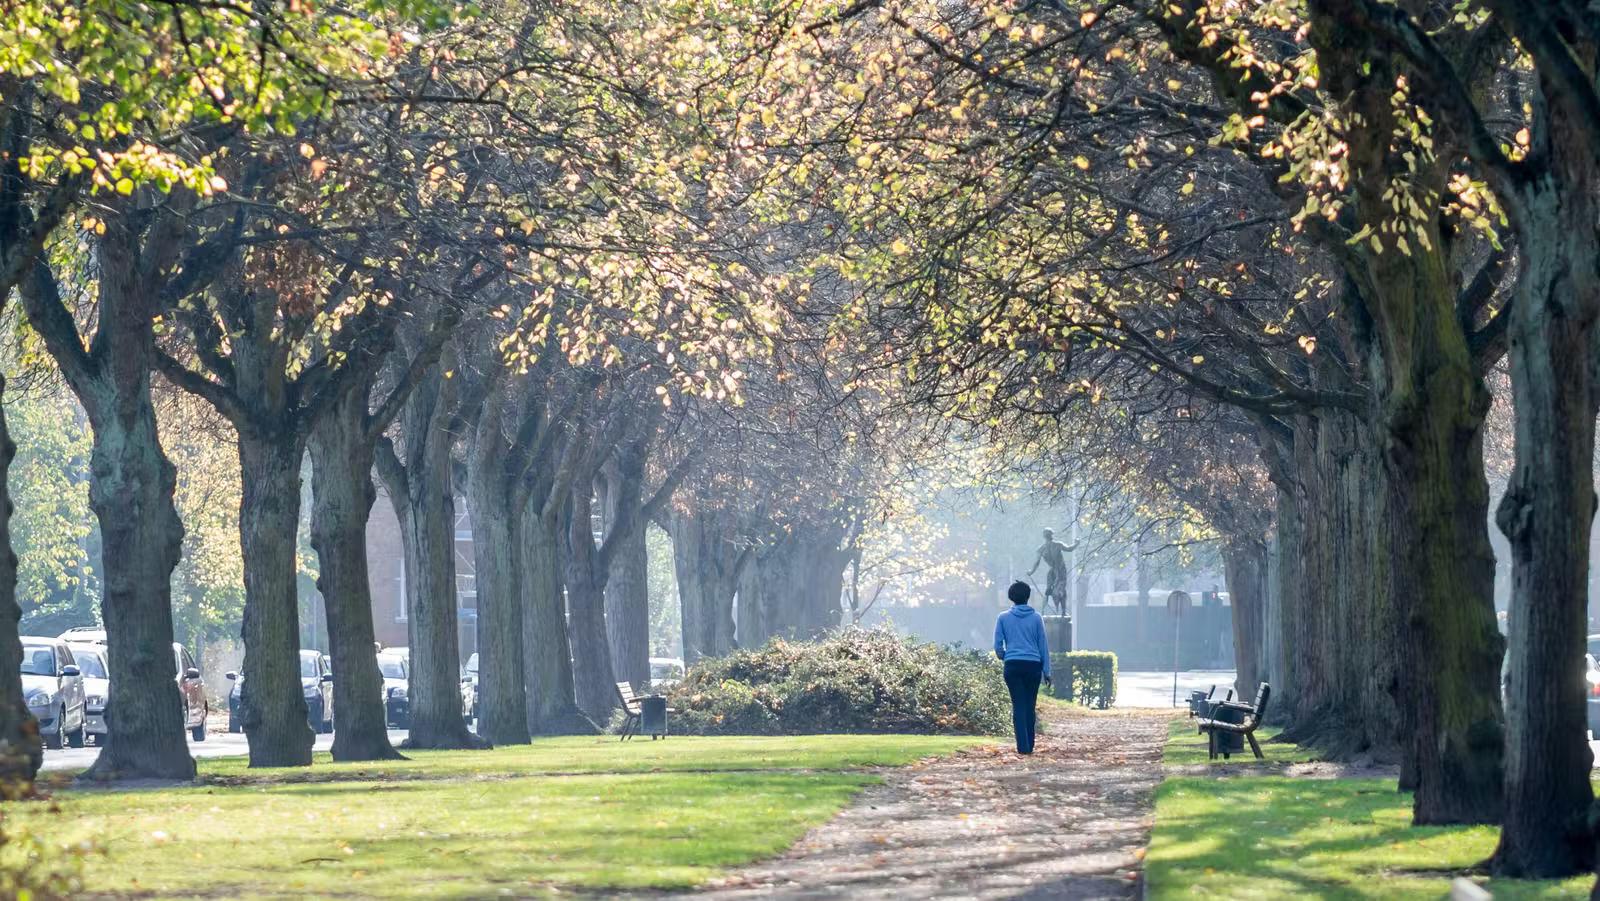 A person walking along a path in Copenhagan's Frederiksberg. Trees line the path and touch overhead, their leaves have just started to turn orange and yellow for autumn